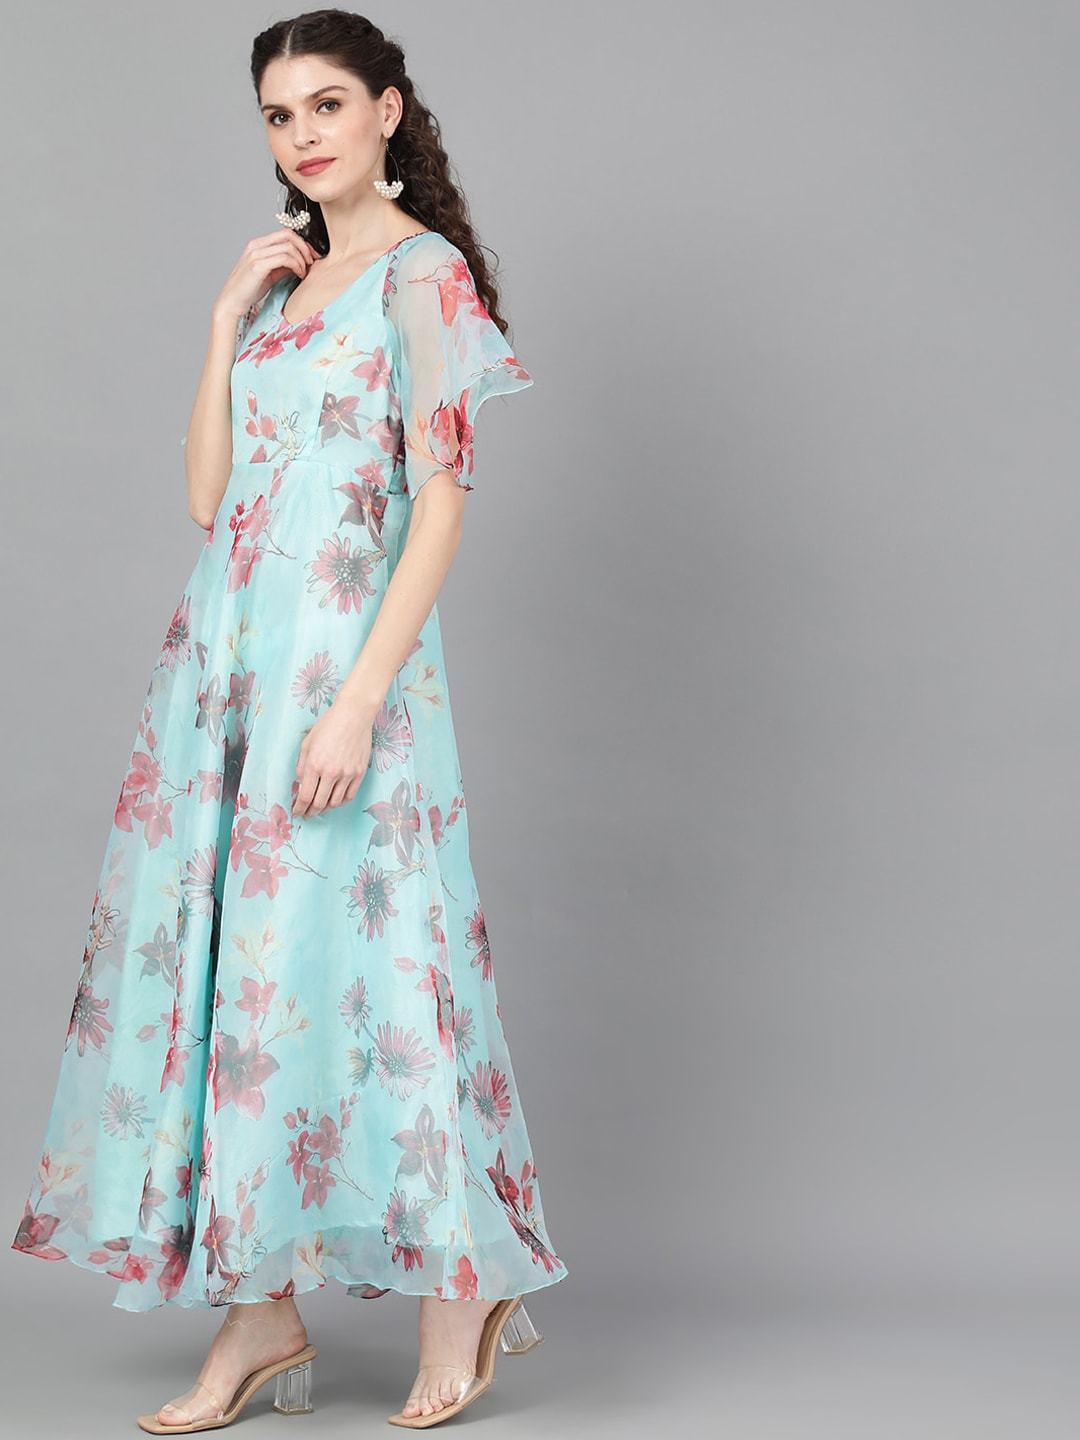 Women's  Turquoise Blue & Pink Floral Printed Maxi Dress - AKS